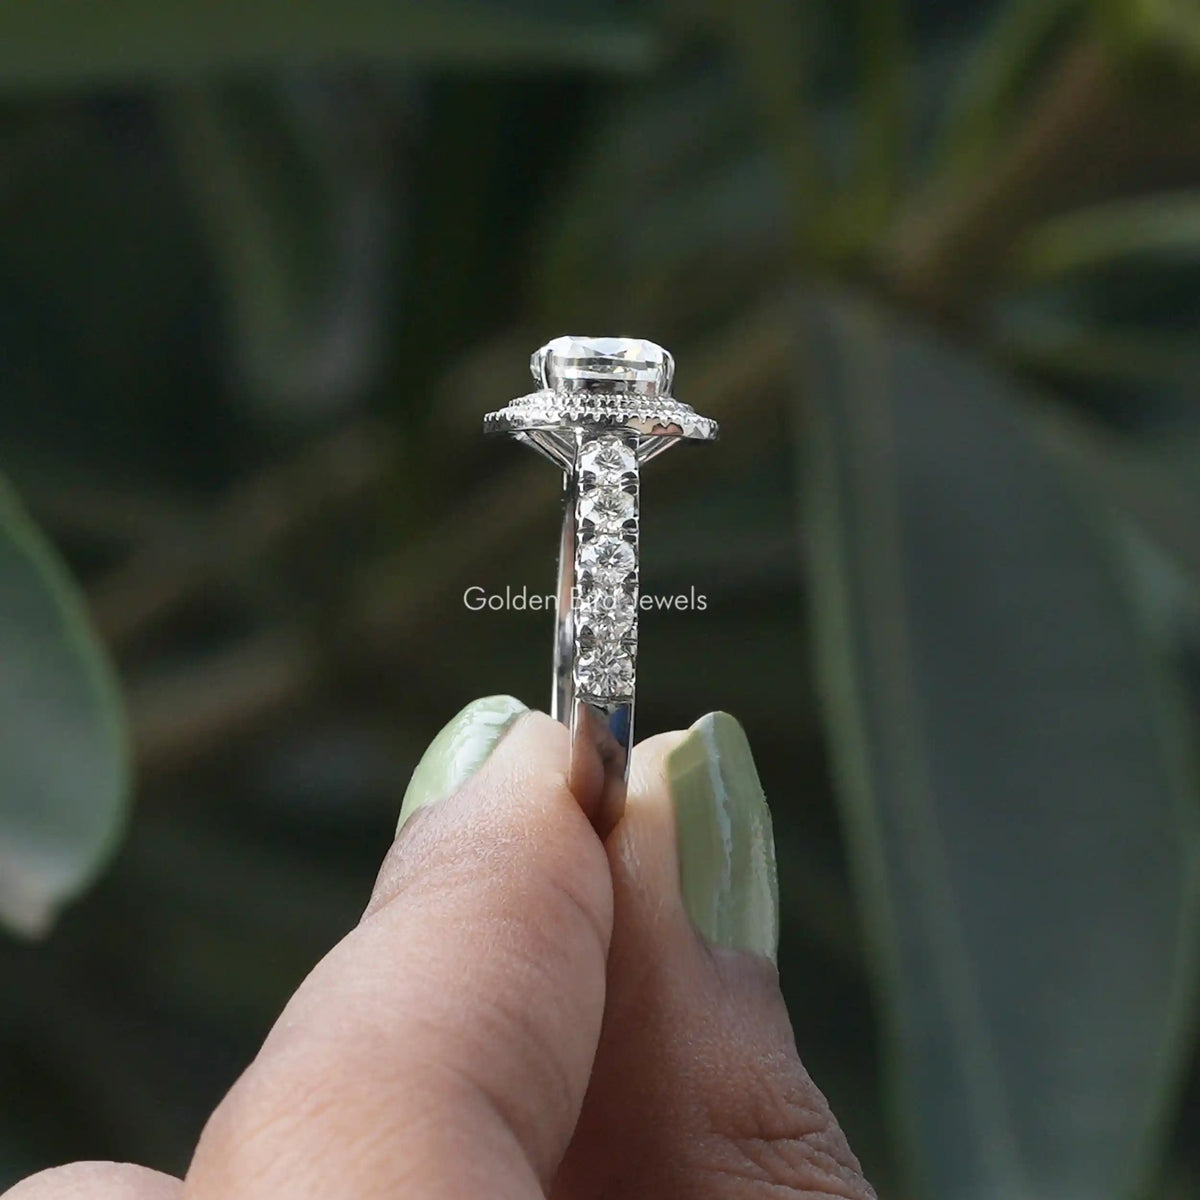 [Side view of cushion cut moissanite halo ring made of prong setting]-[Golden Bird Jewels]